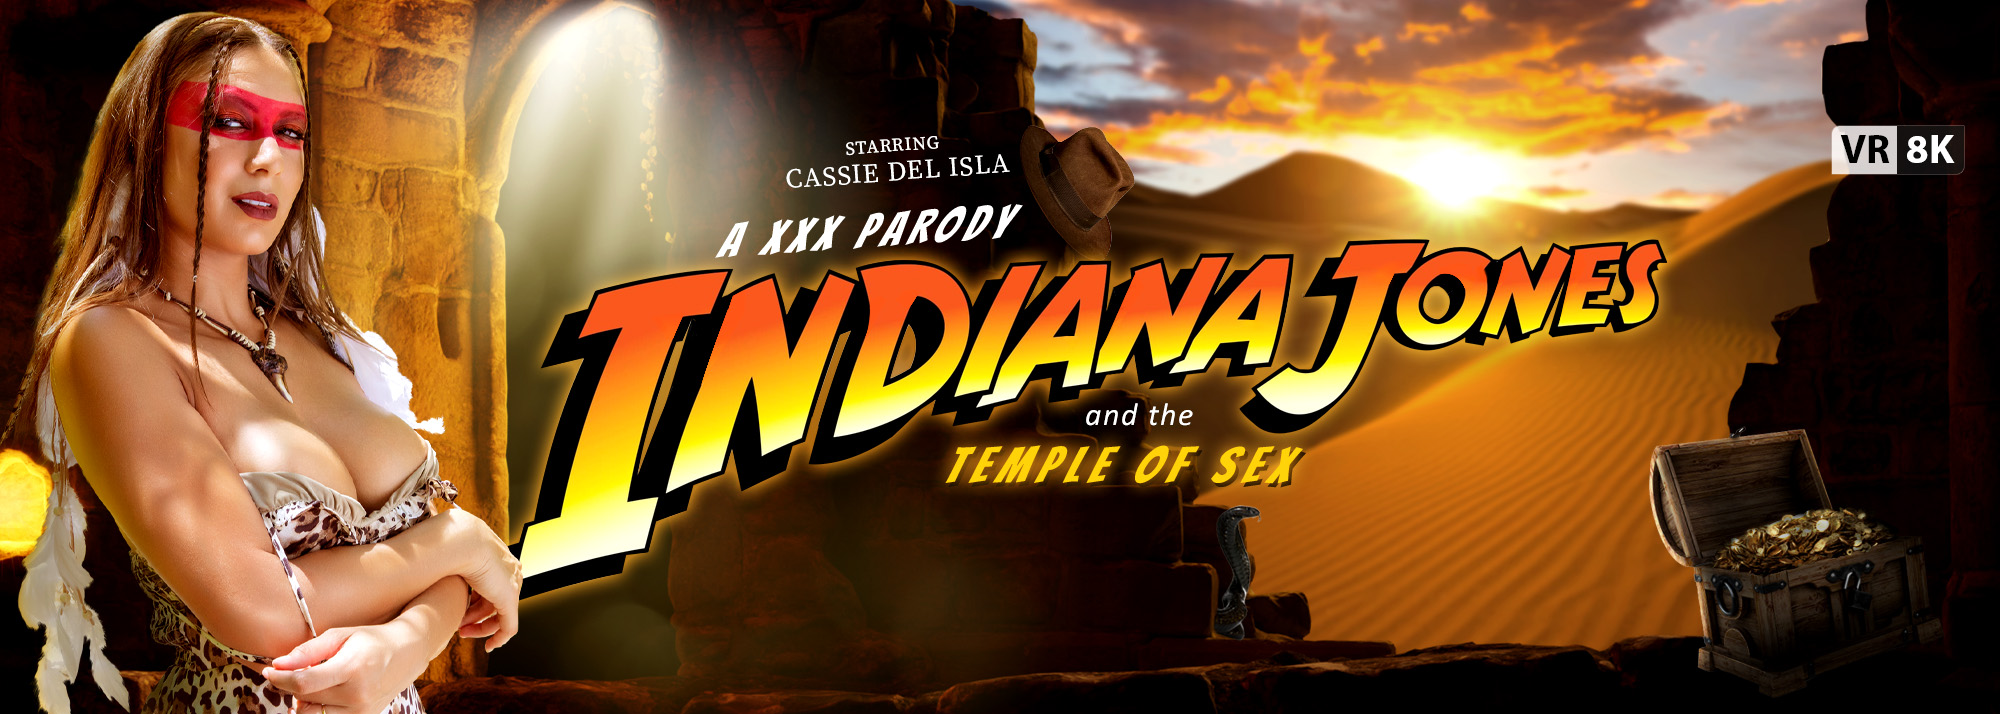 Indiana Jones and the Temple of Sex (A XXX Parody) - VR Porn Video, Starring Cassie Del Isla VR